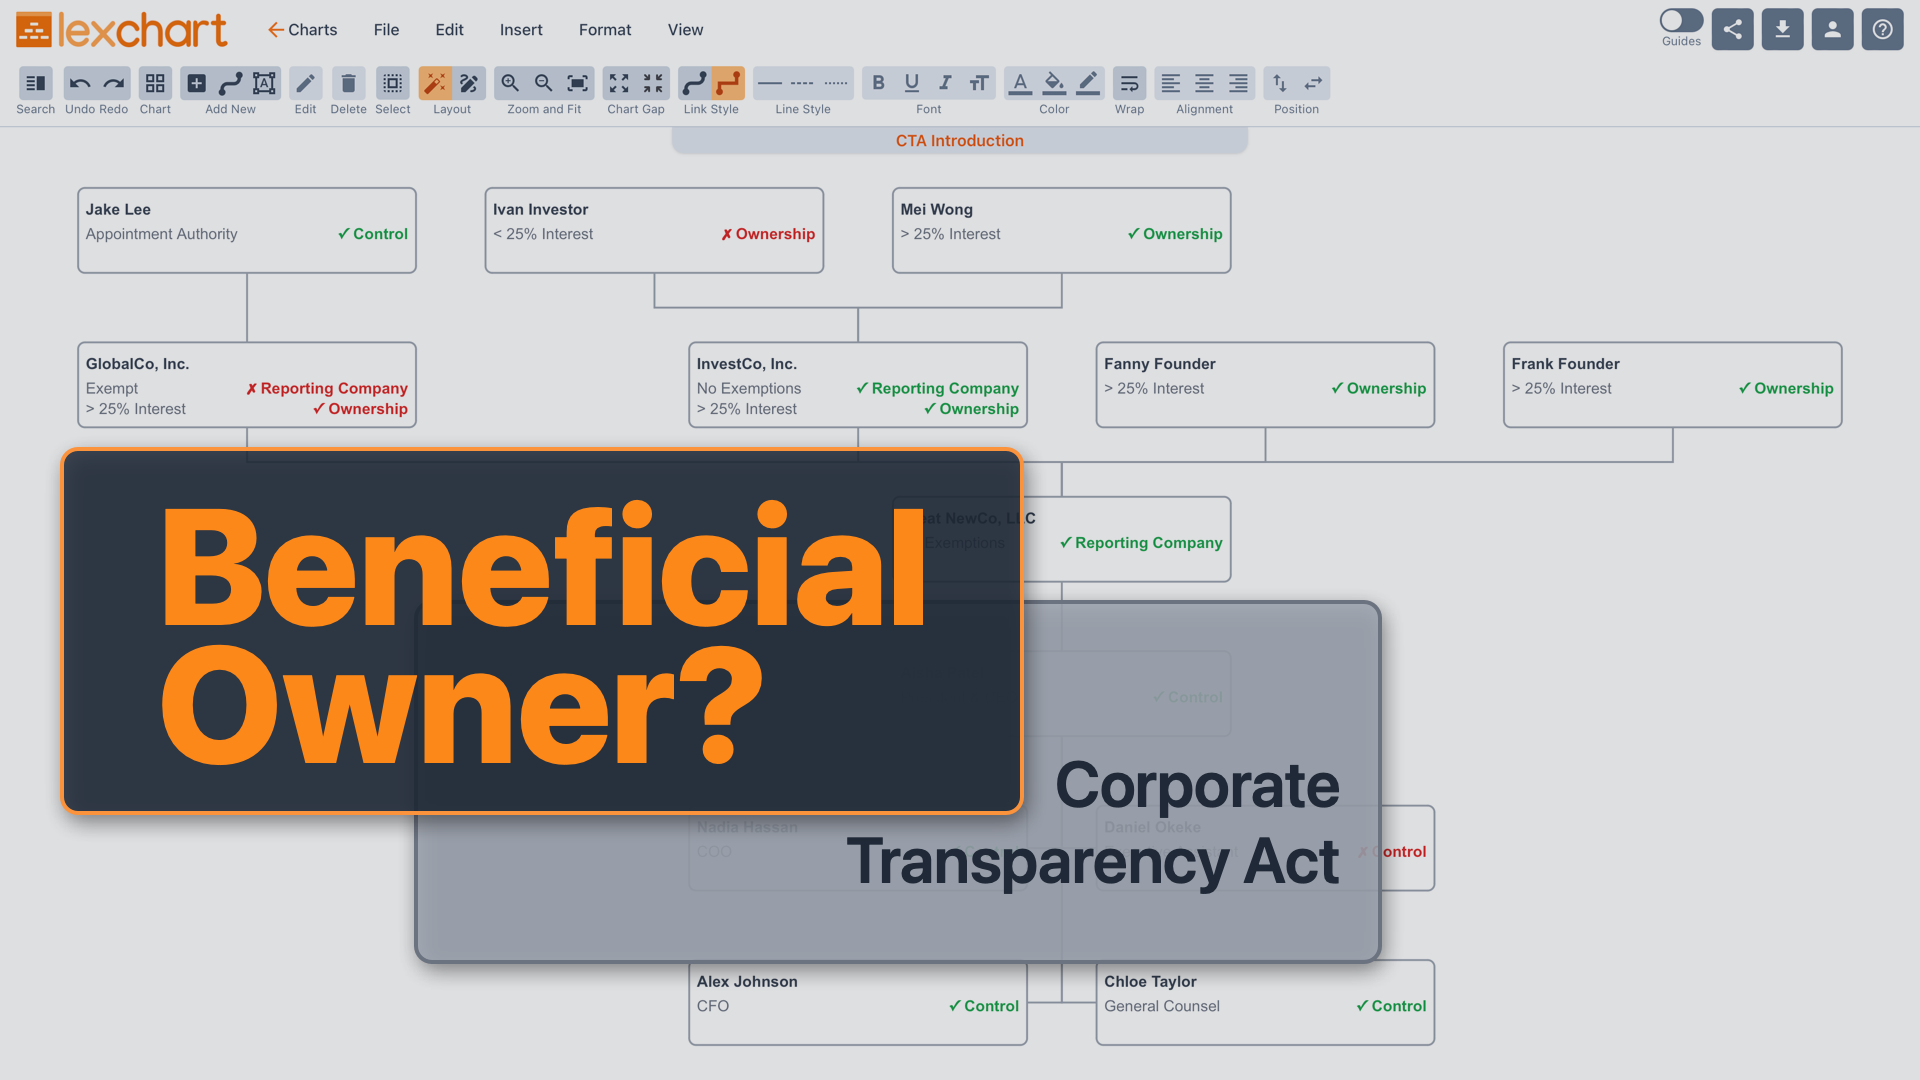 Who is a Beneficial Owner?